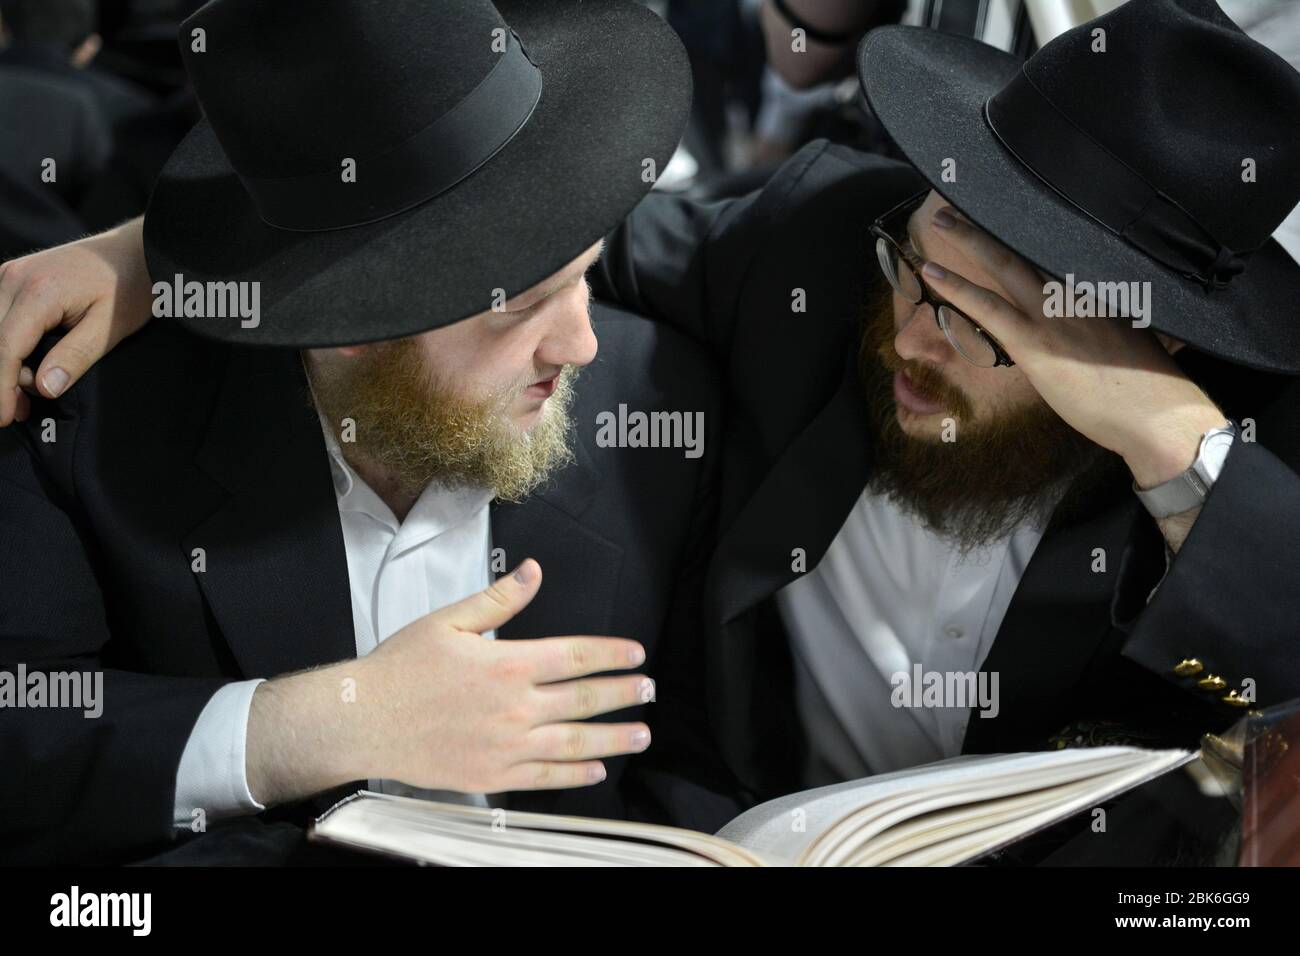 Two orthodox Jewish young men study together in a partnership called a chavrusa. At a synagogue in Queens, New York. Stock Photo